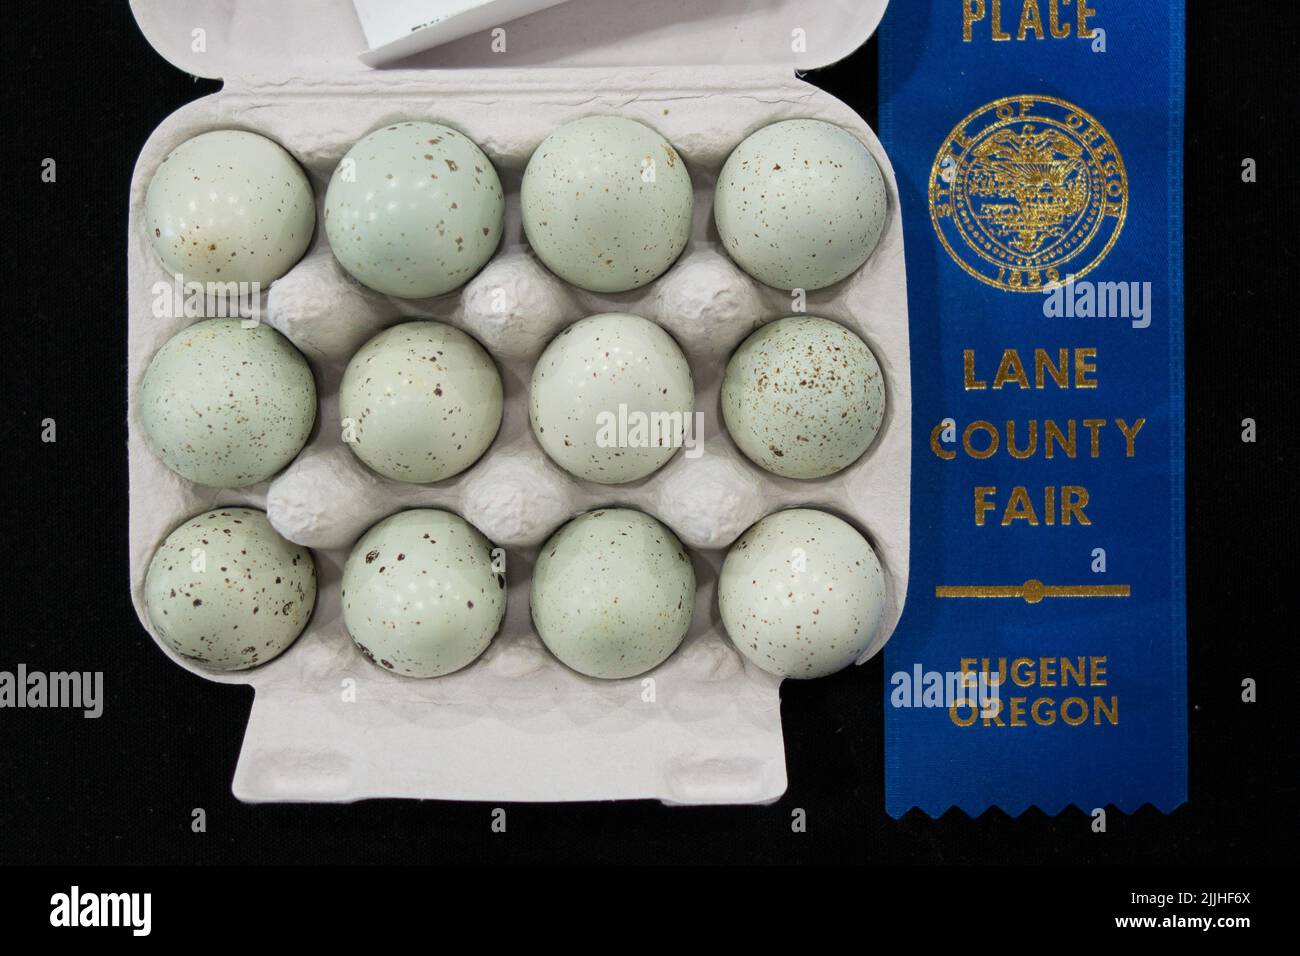 The first place blue ribbon winner in the eggs competition, with quail eggs,  at the Lane County Fair in Eugene, Oregon. Stock Photo